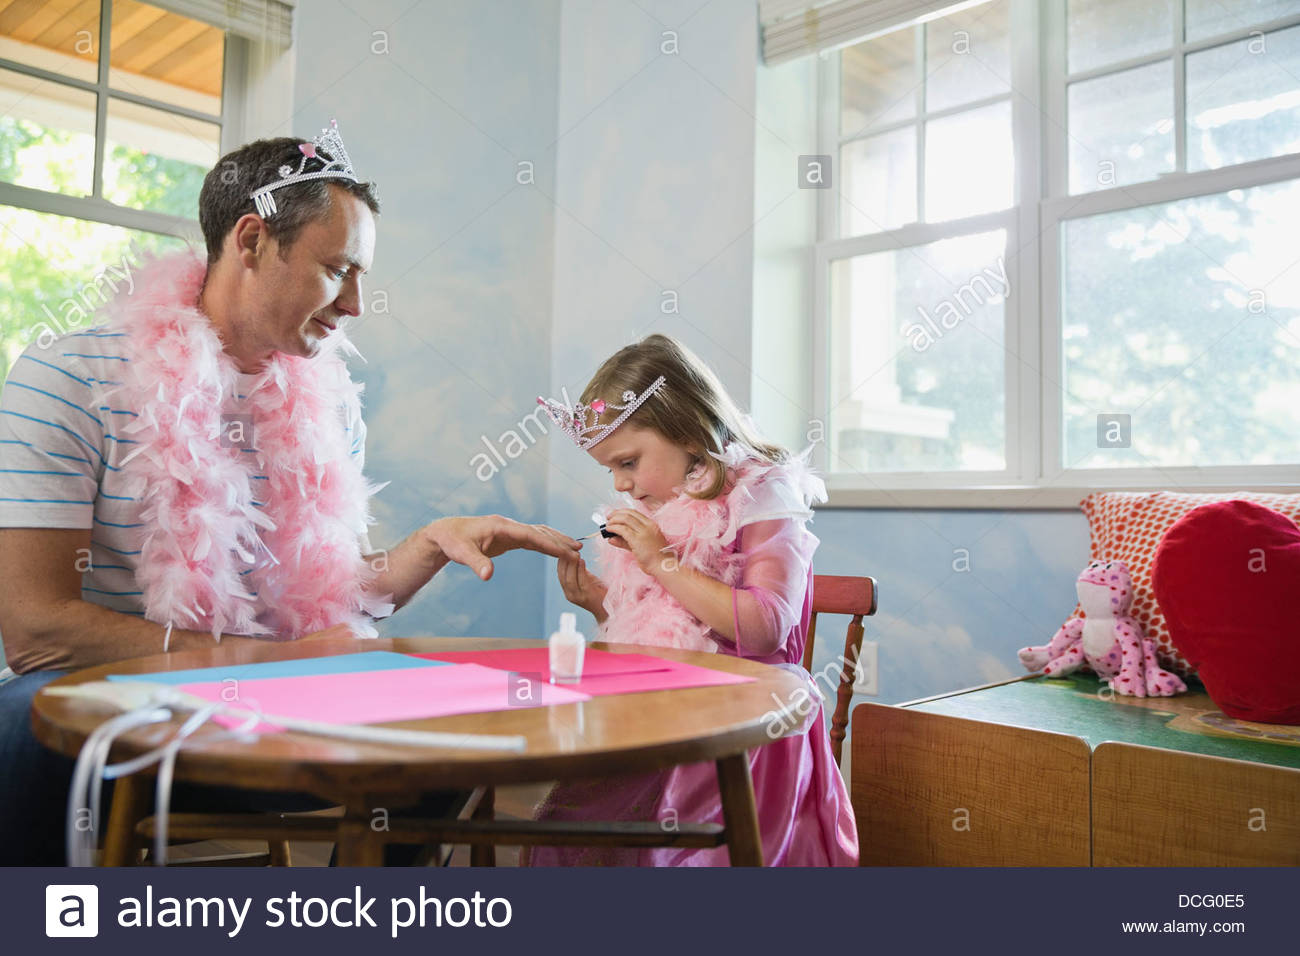 Little girl painting fathers fingernails at table Stock Photo